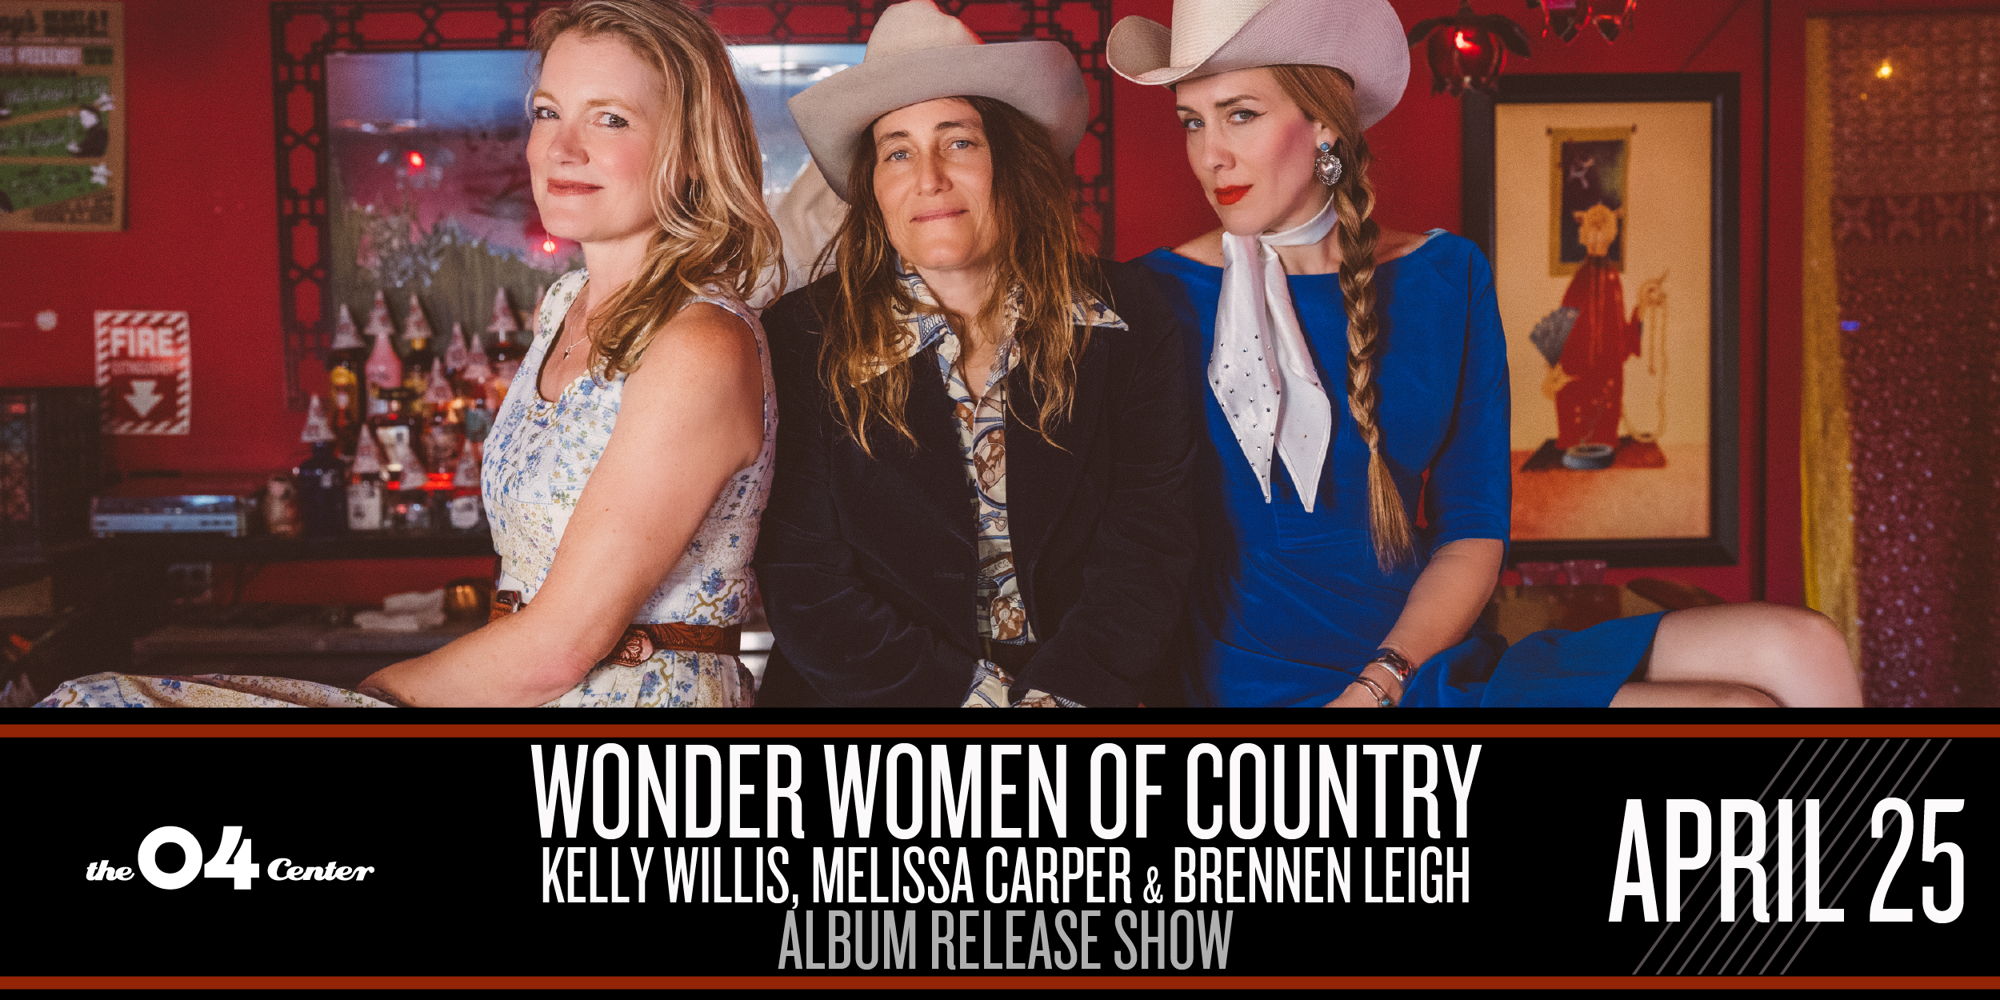 Wonder Women of Country Album Release Show with Kelly Willis, Melisa Carper & Brennen Leigh promotional image